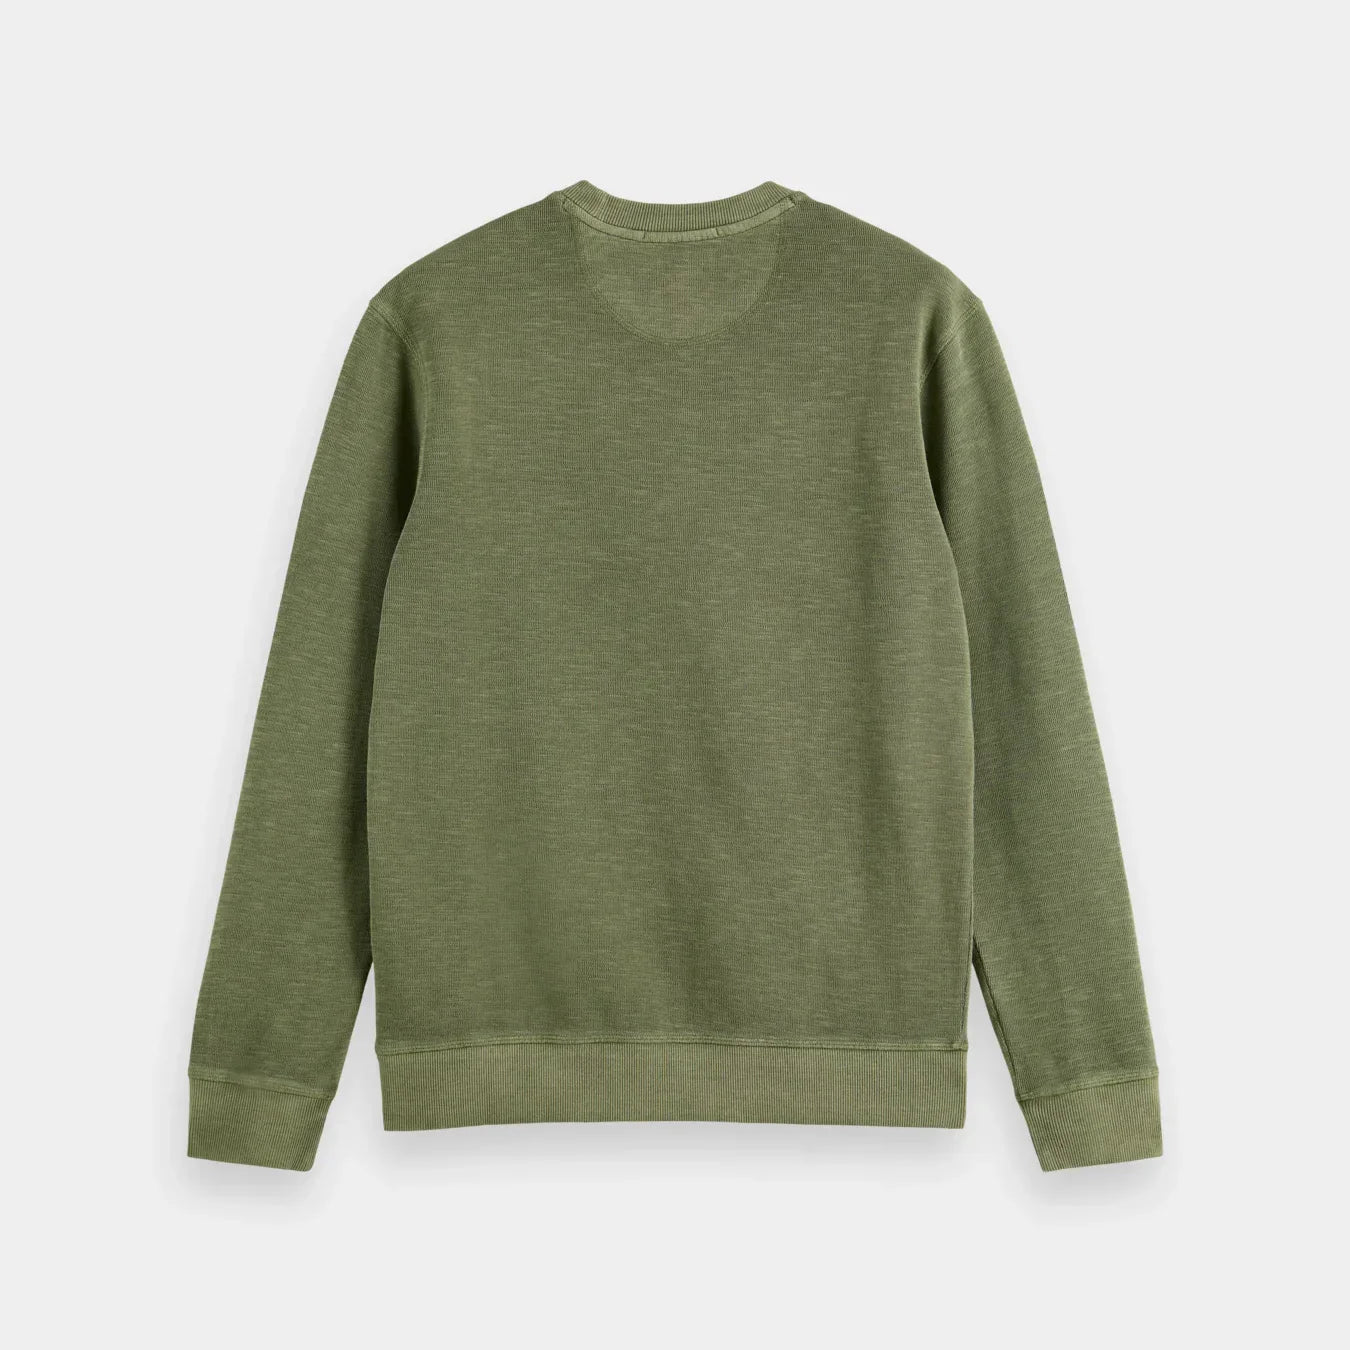 'Scotch & Soda Long Sleeve Dyed Shirt' in 'Army' colour